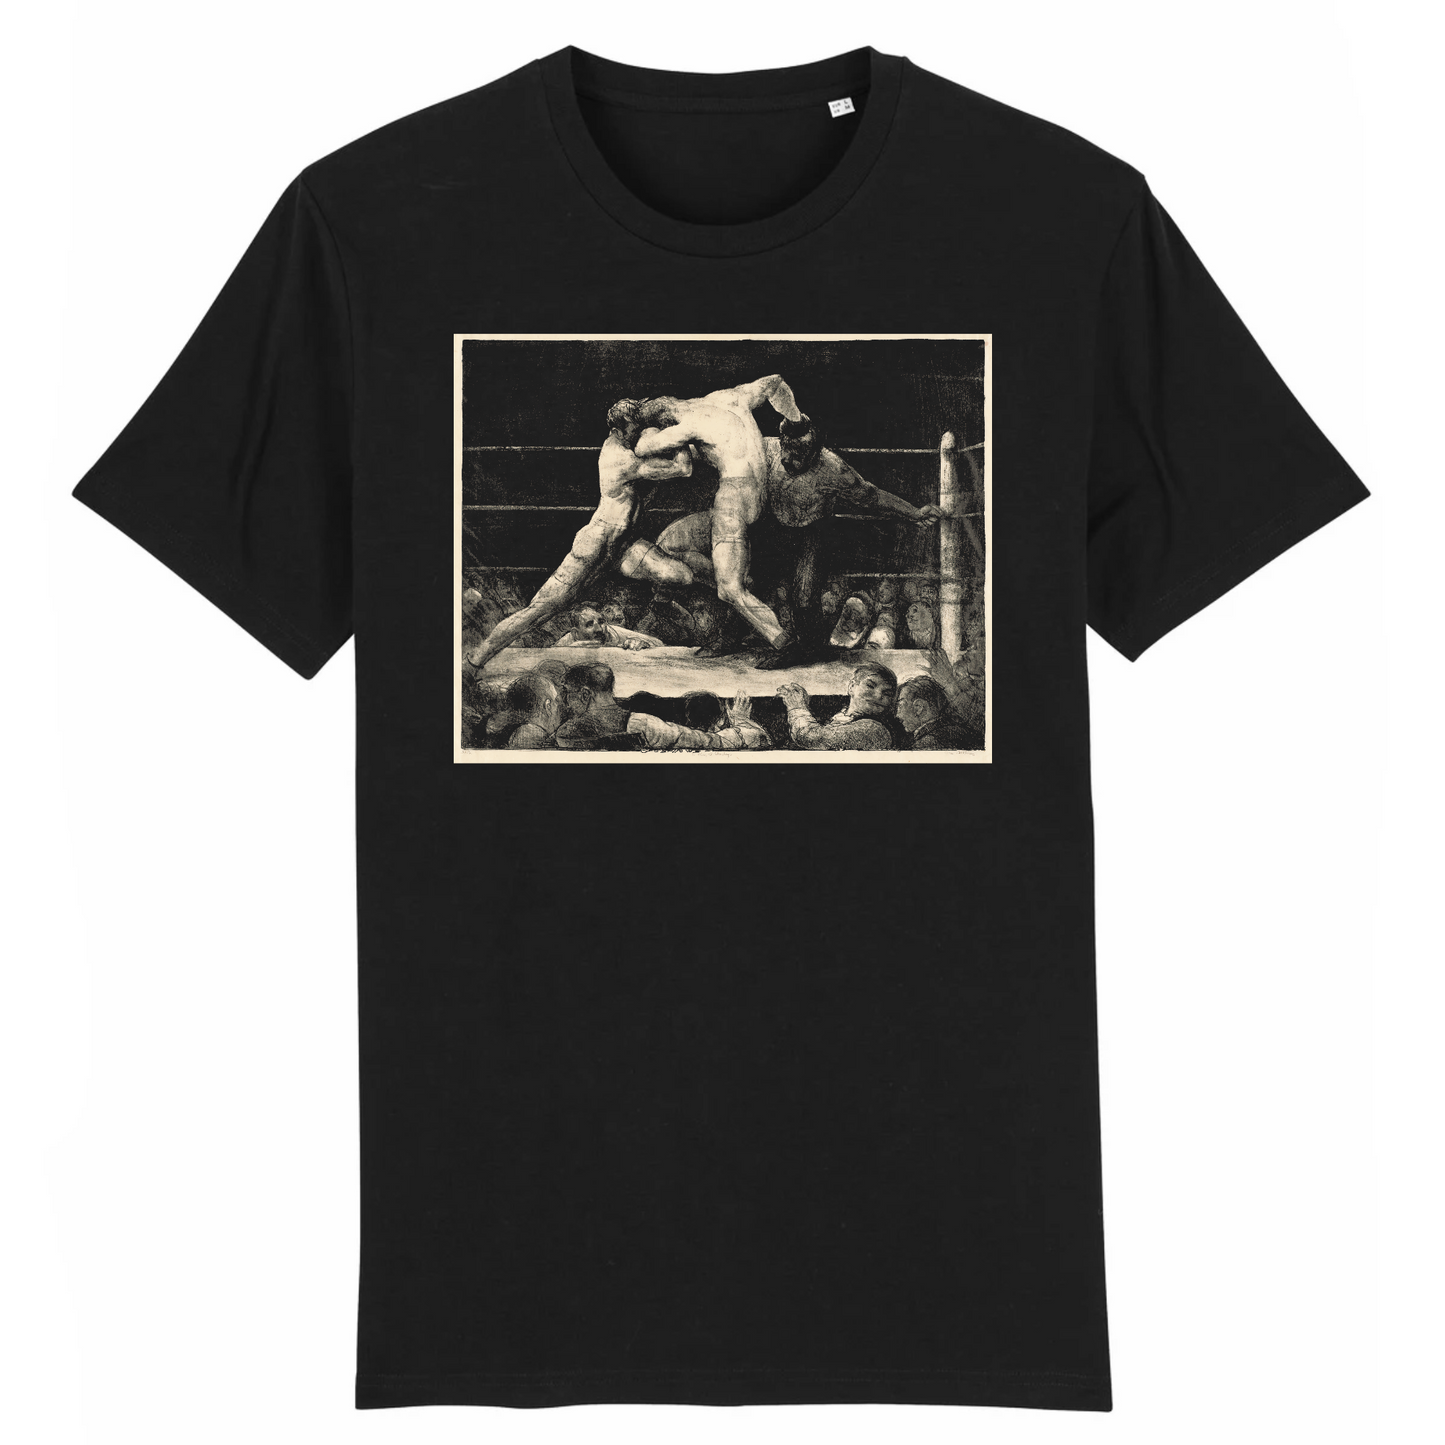 A Stag at Sharkey's by George Bellows, 1917 - Organic Cotton T-Shirt